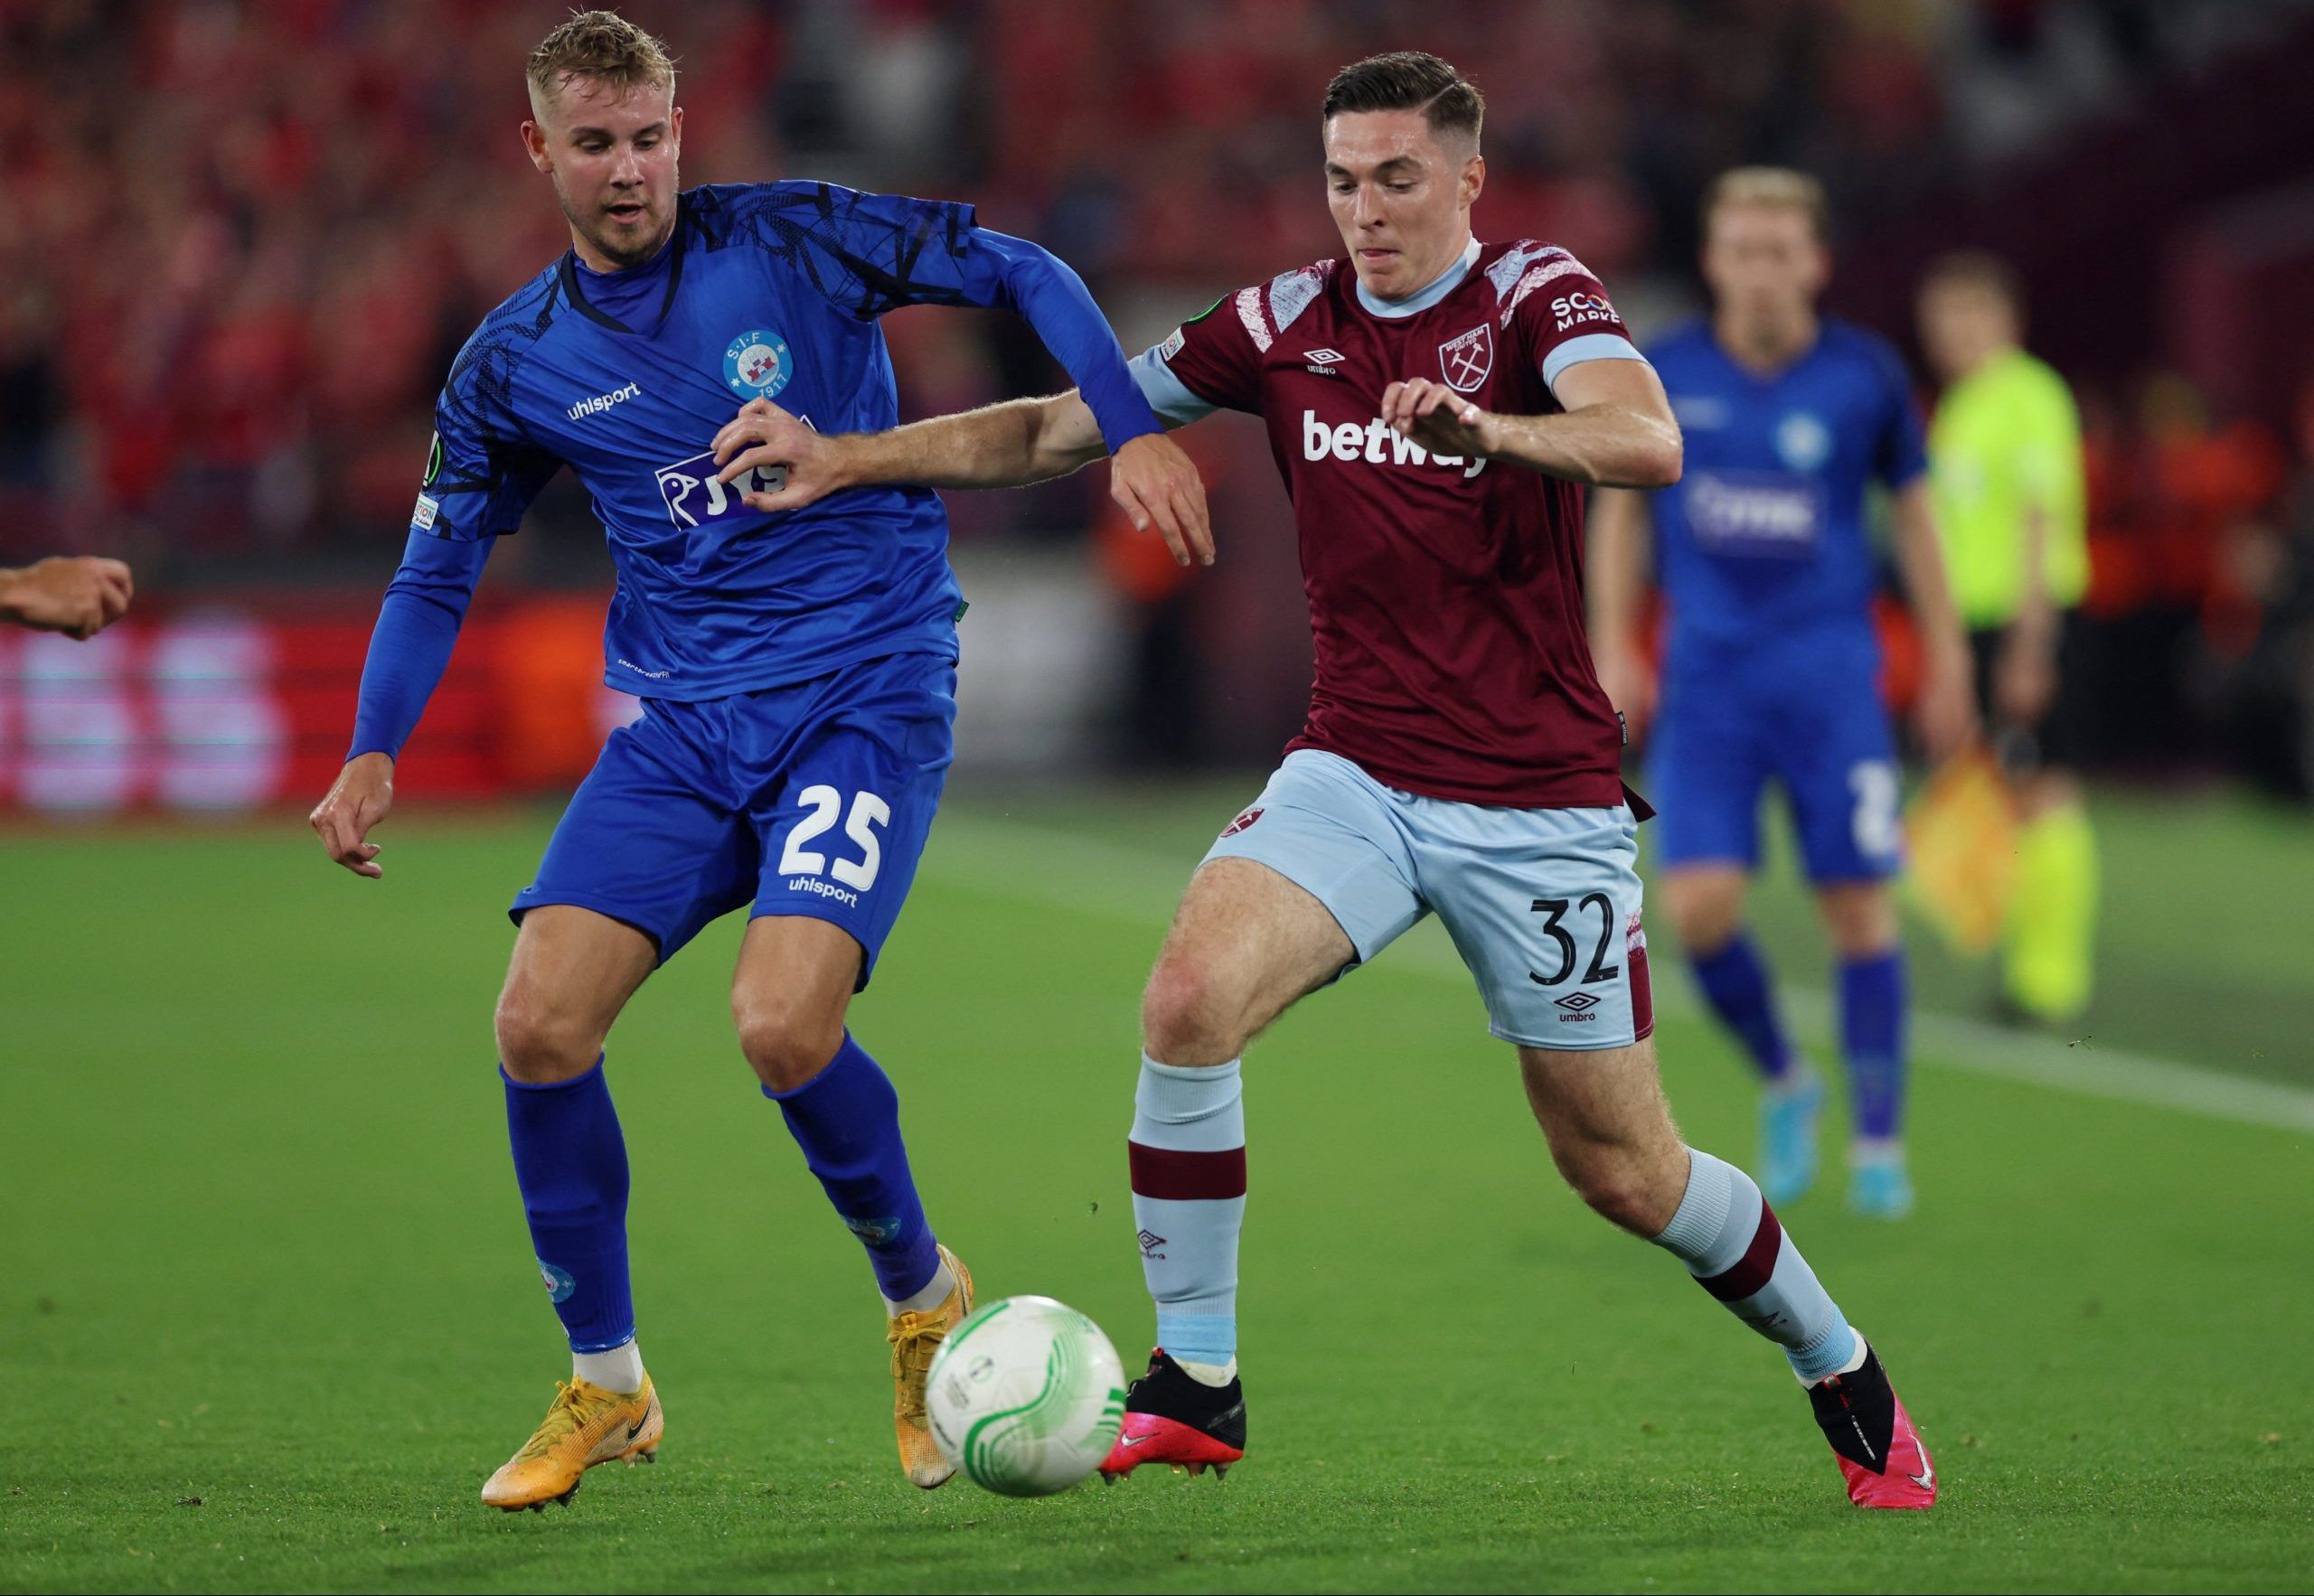 Conor-Coventry-West-Ham-United-Academy-Declan-Rice